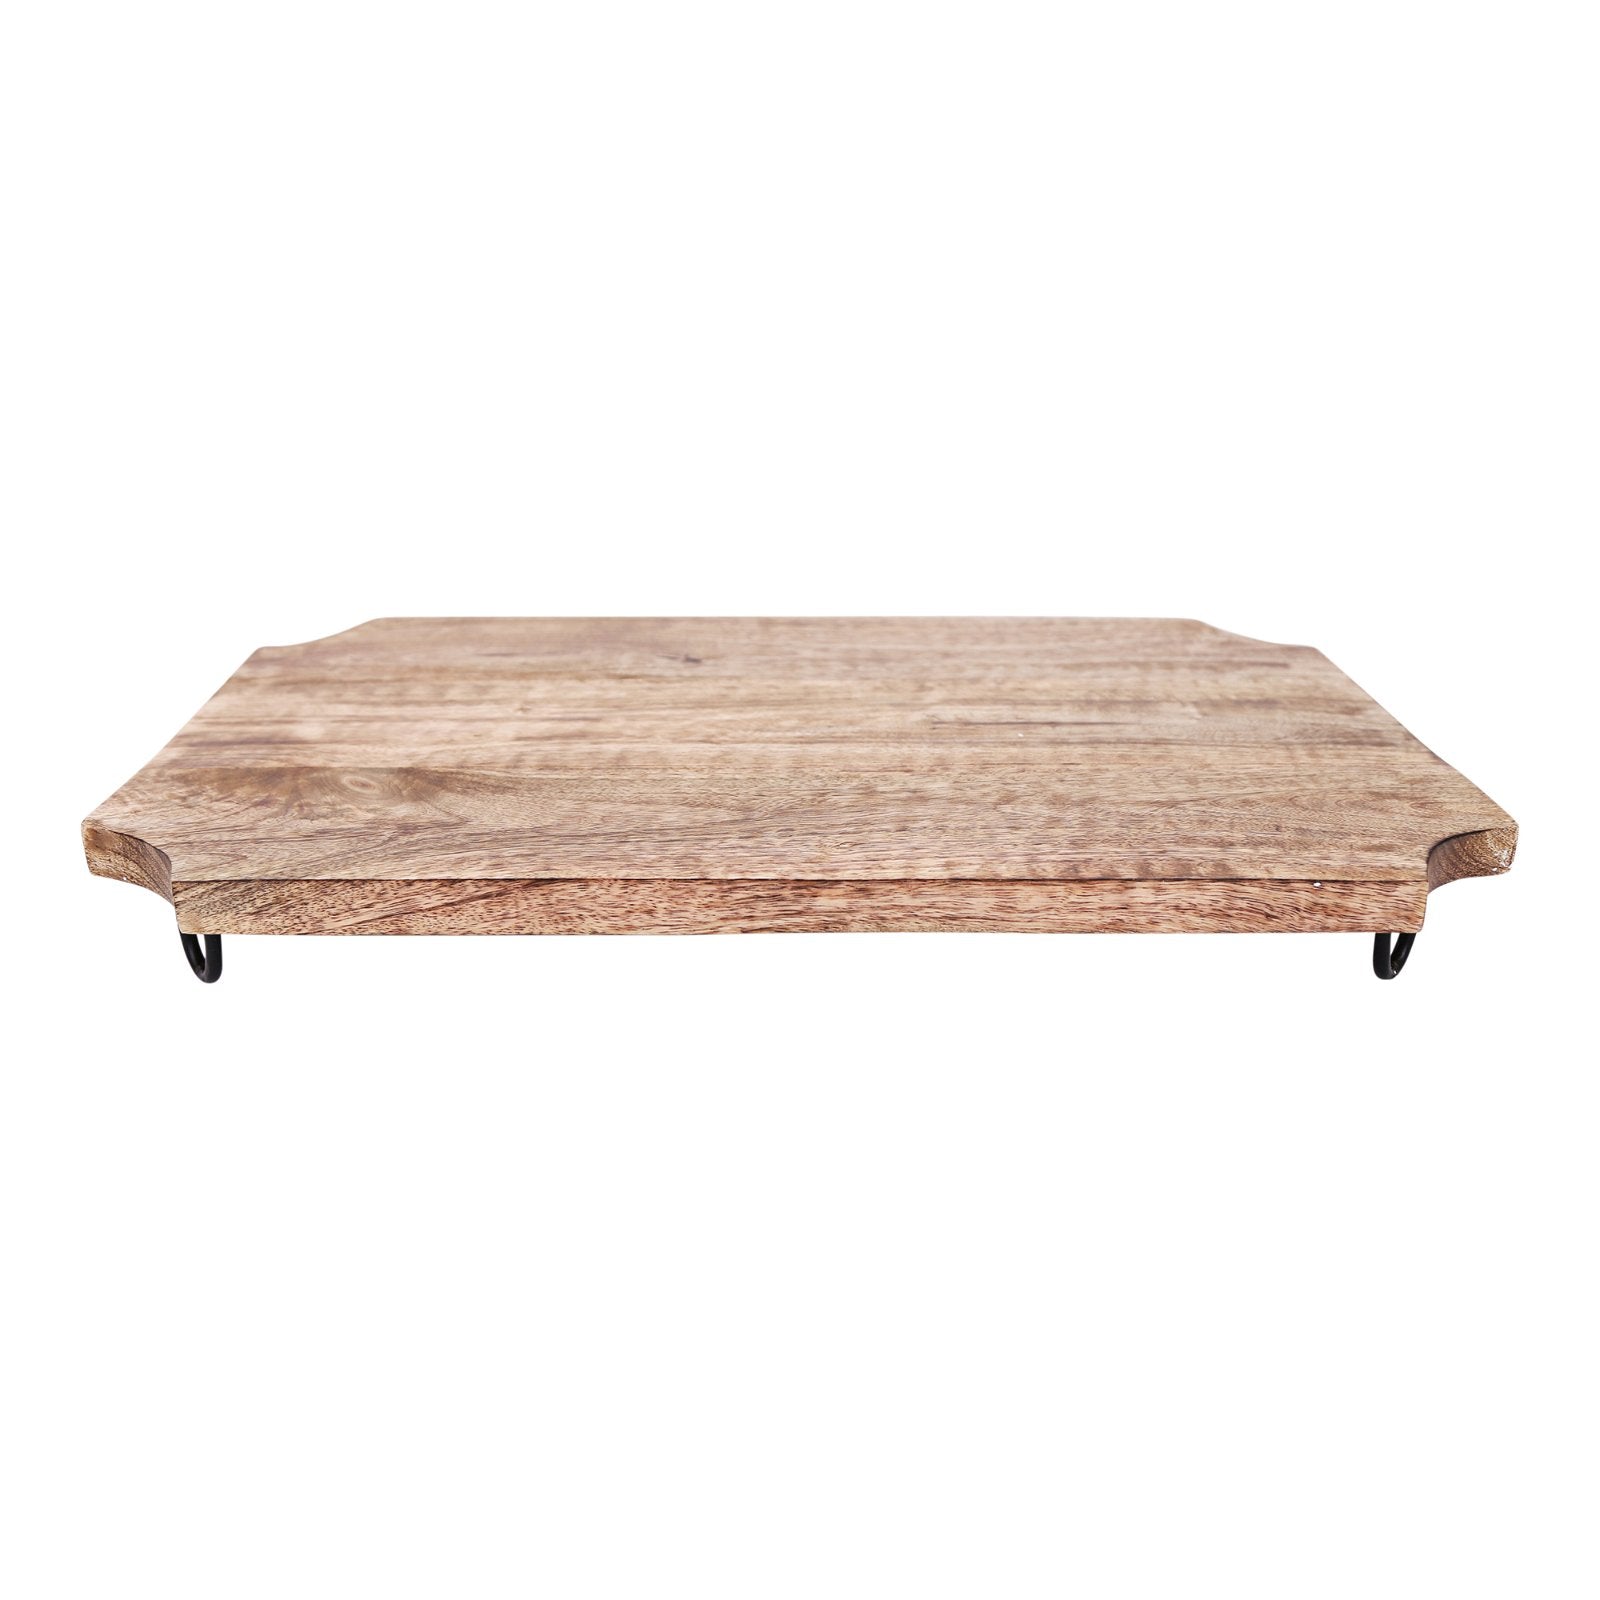 Wooden Distressed Chopping Board On Legs 51cm Willow and Wine